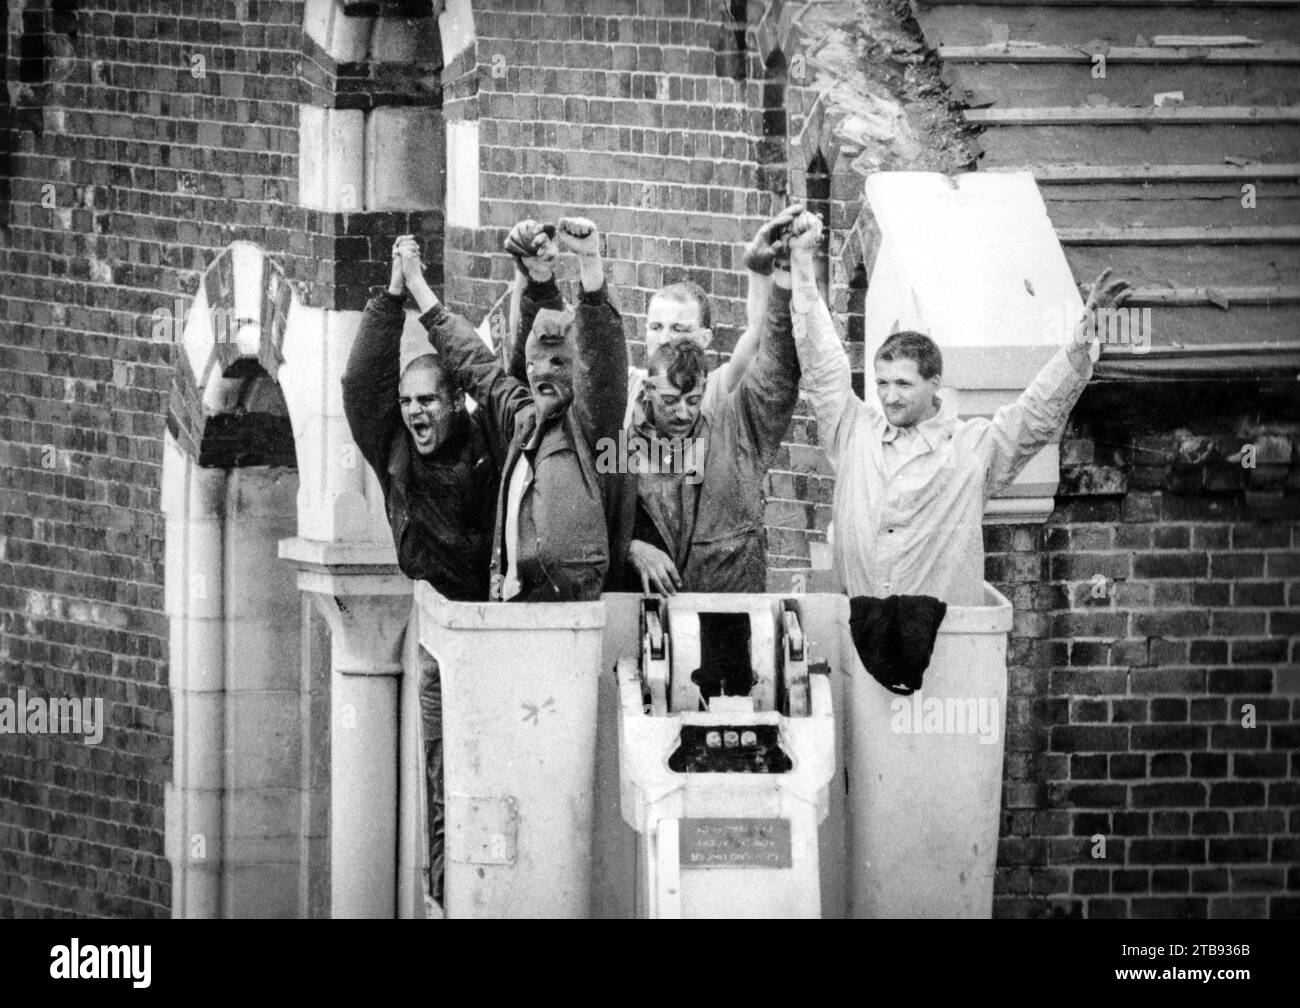 April 25th 1990 - Mark Williams, John Murray, Paul Taylor, Martin Brian and Glyn Williams, the last remaining prisoners, are removed from the roof after the Strangeways Prison riot , Manchester, UK. Stock Photo